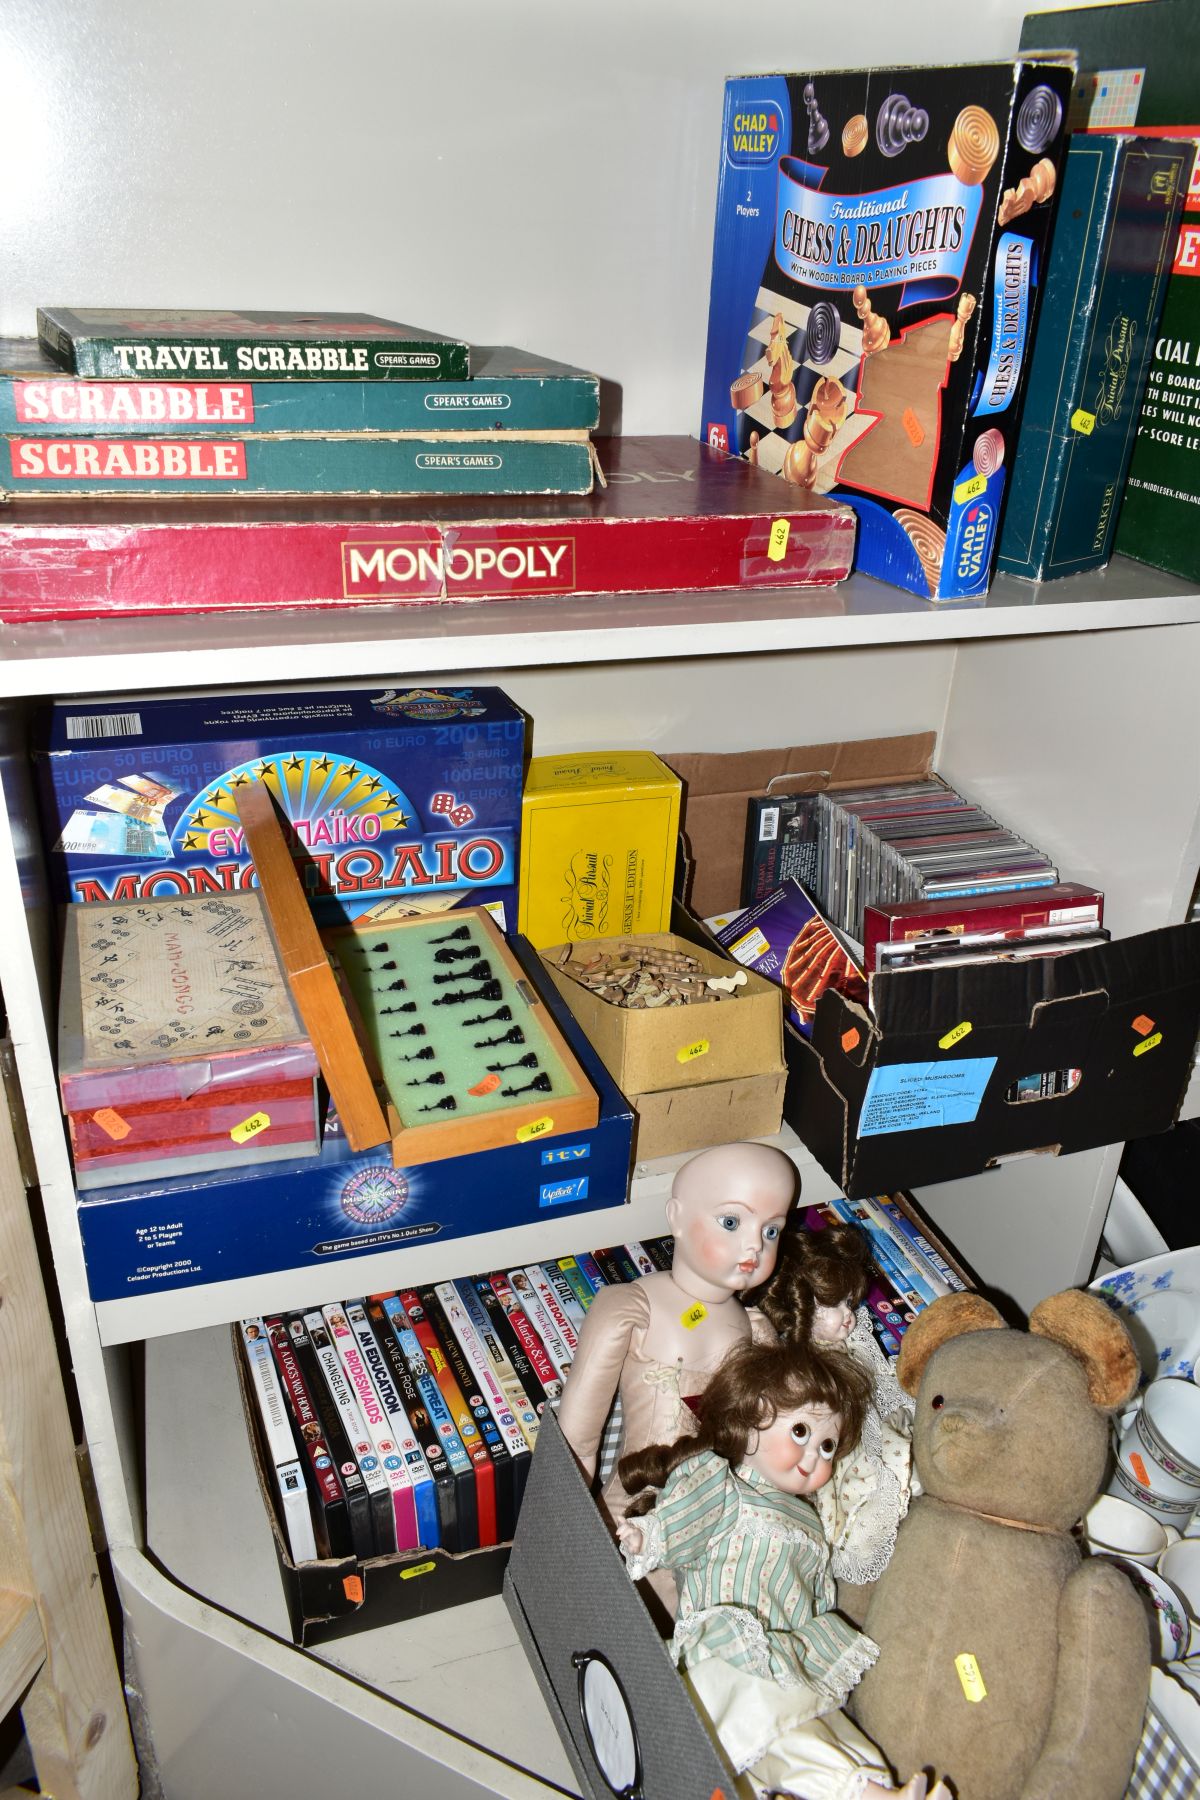 A QUANTITY OF DOLLS, BOARD GAMES, CD'S AND DVD'S, dolls include modern reproduction, Creations